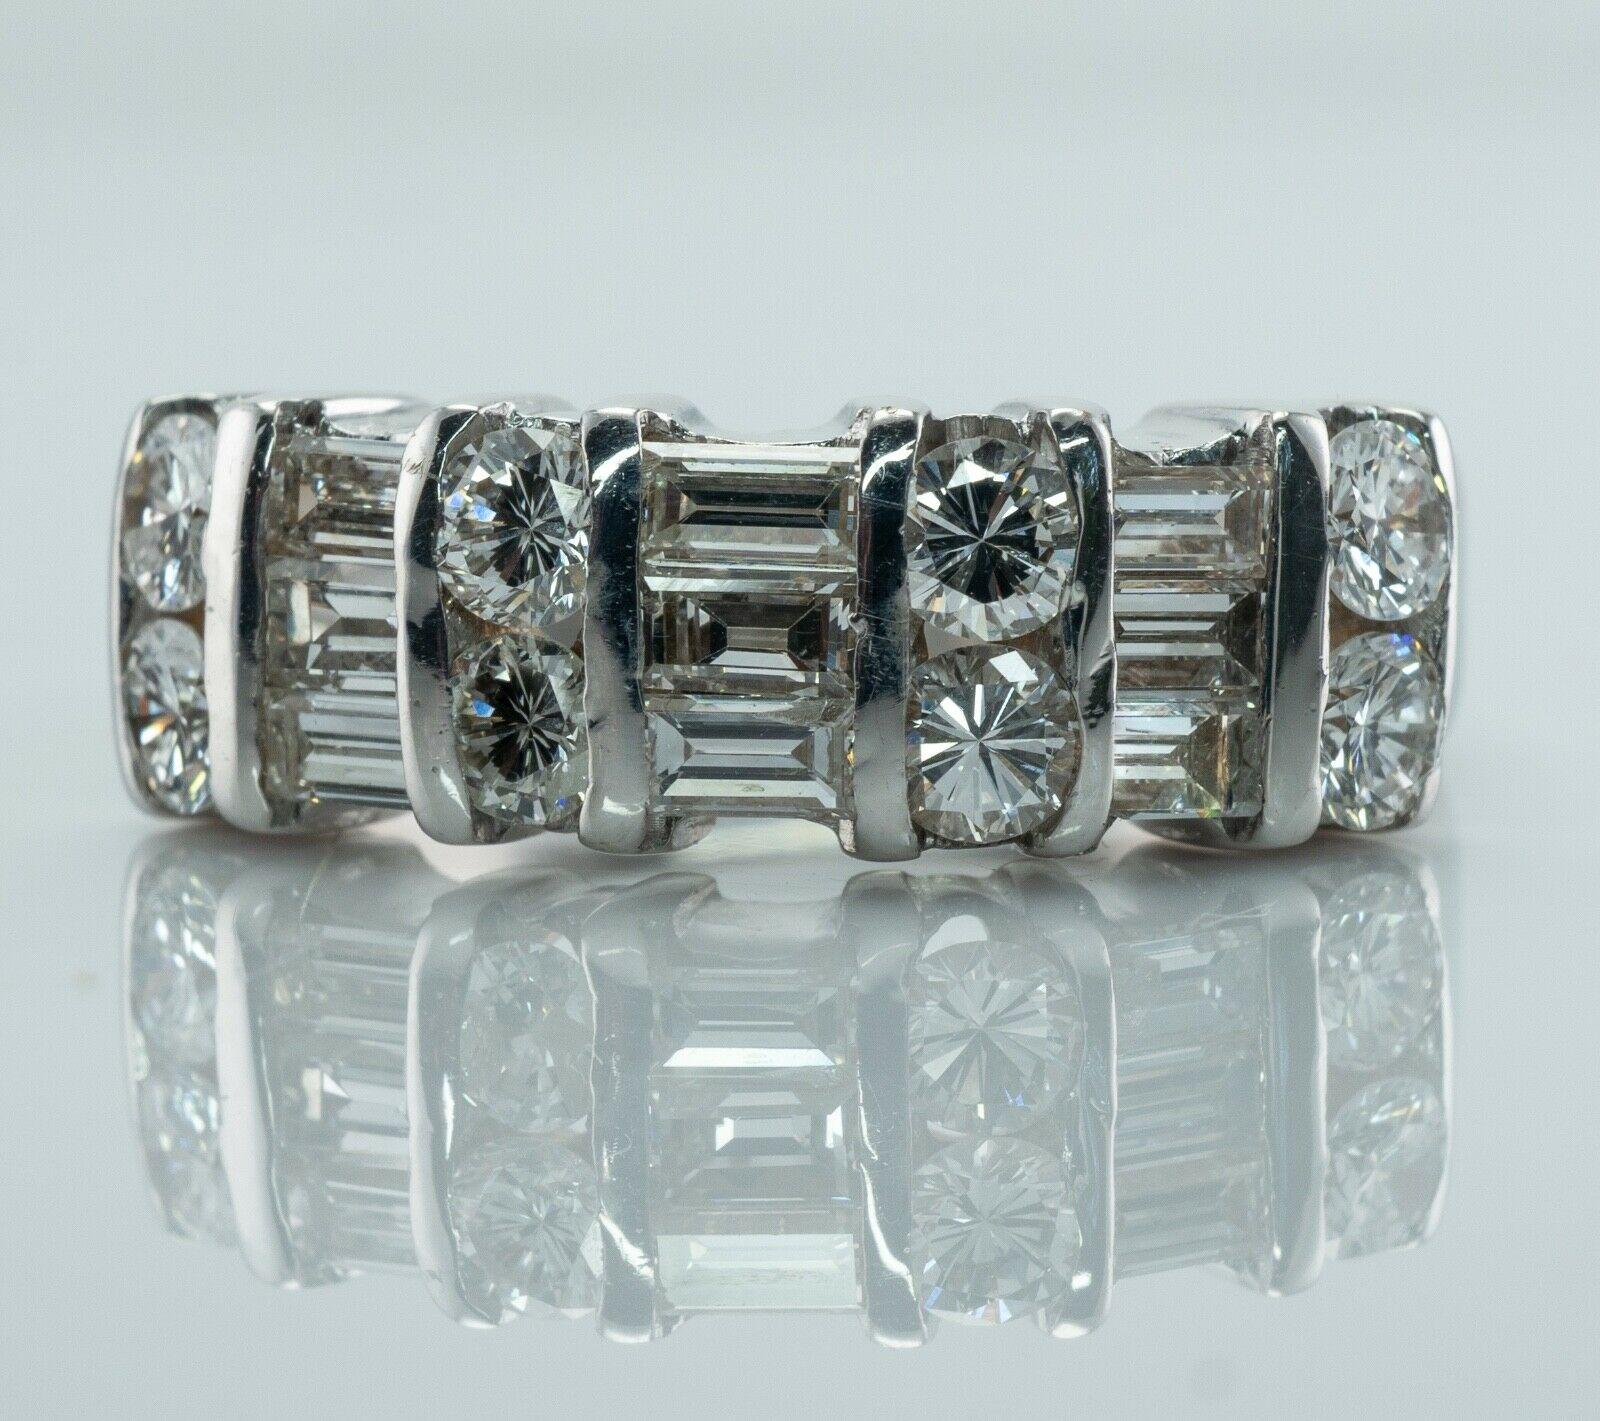 This beautiful estate diamond ring is finely crafted in solid 14K White Gold.
Eight round cut diamonds total .64 carat. Seven diamond baguettes total .63 carat.
One round cut and one baguette has small chips on the surface that cannot be seen